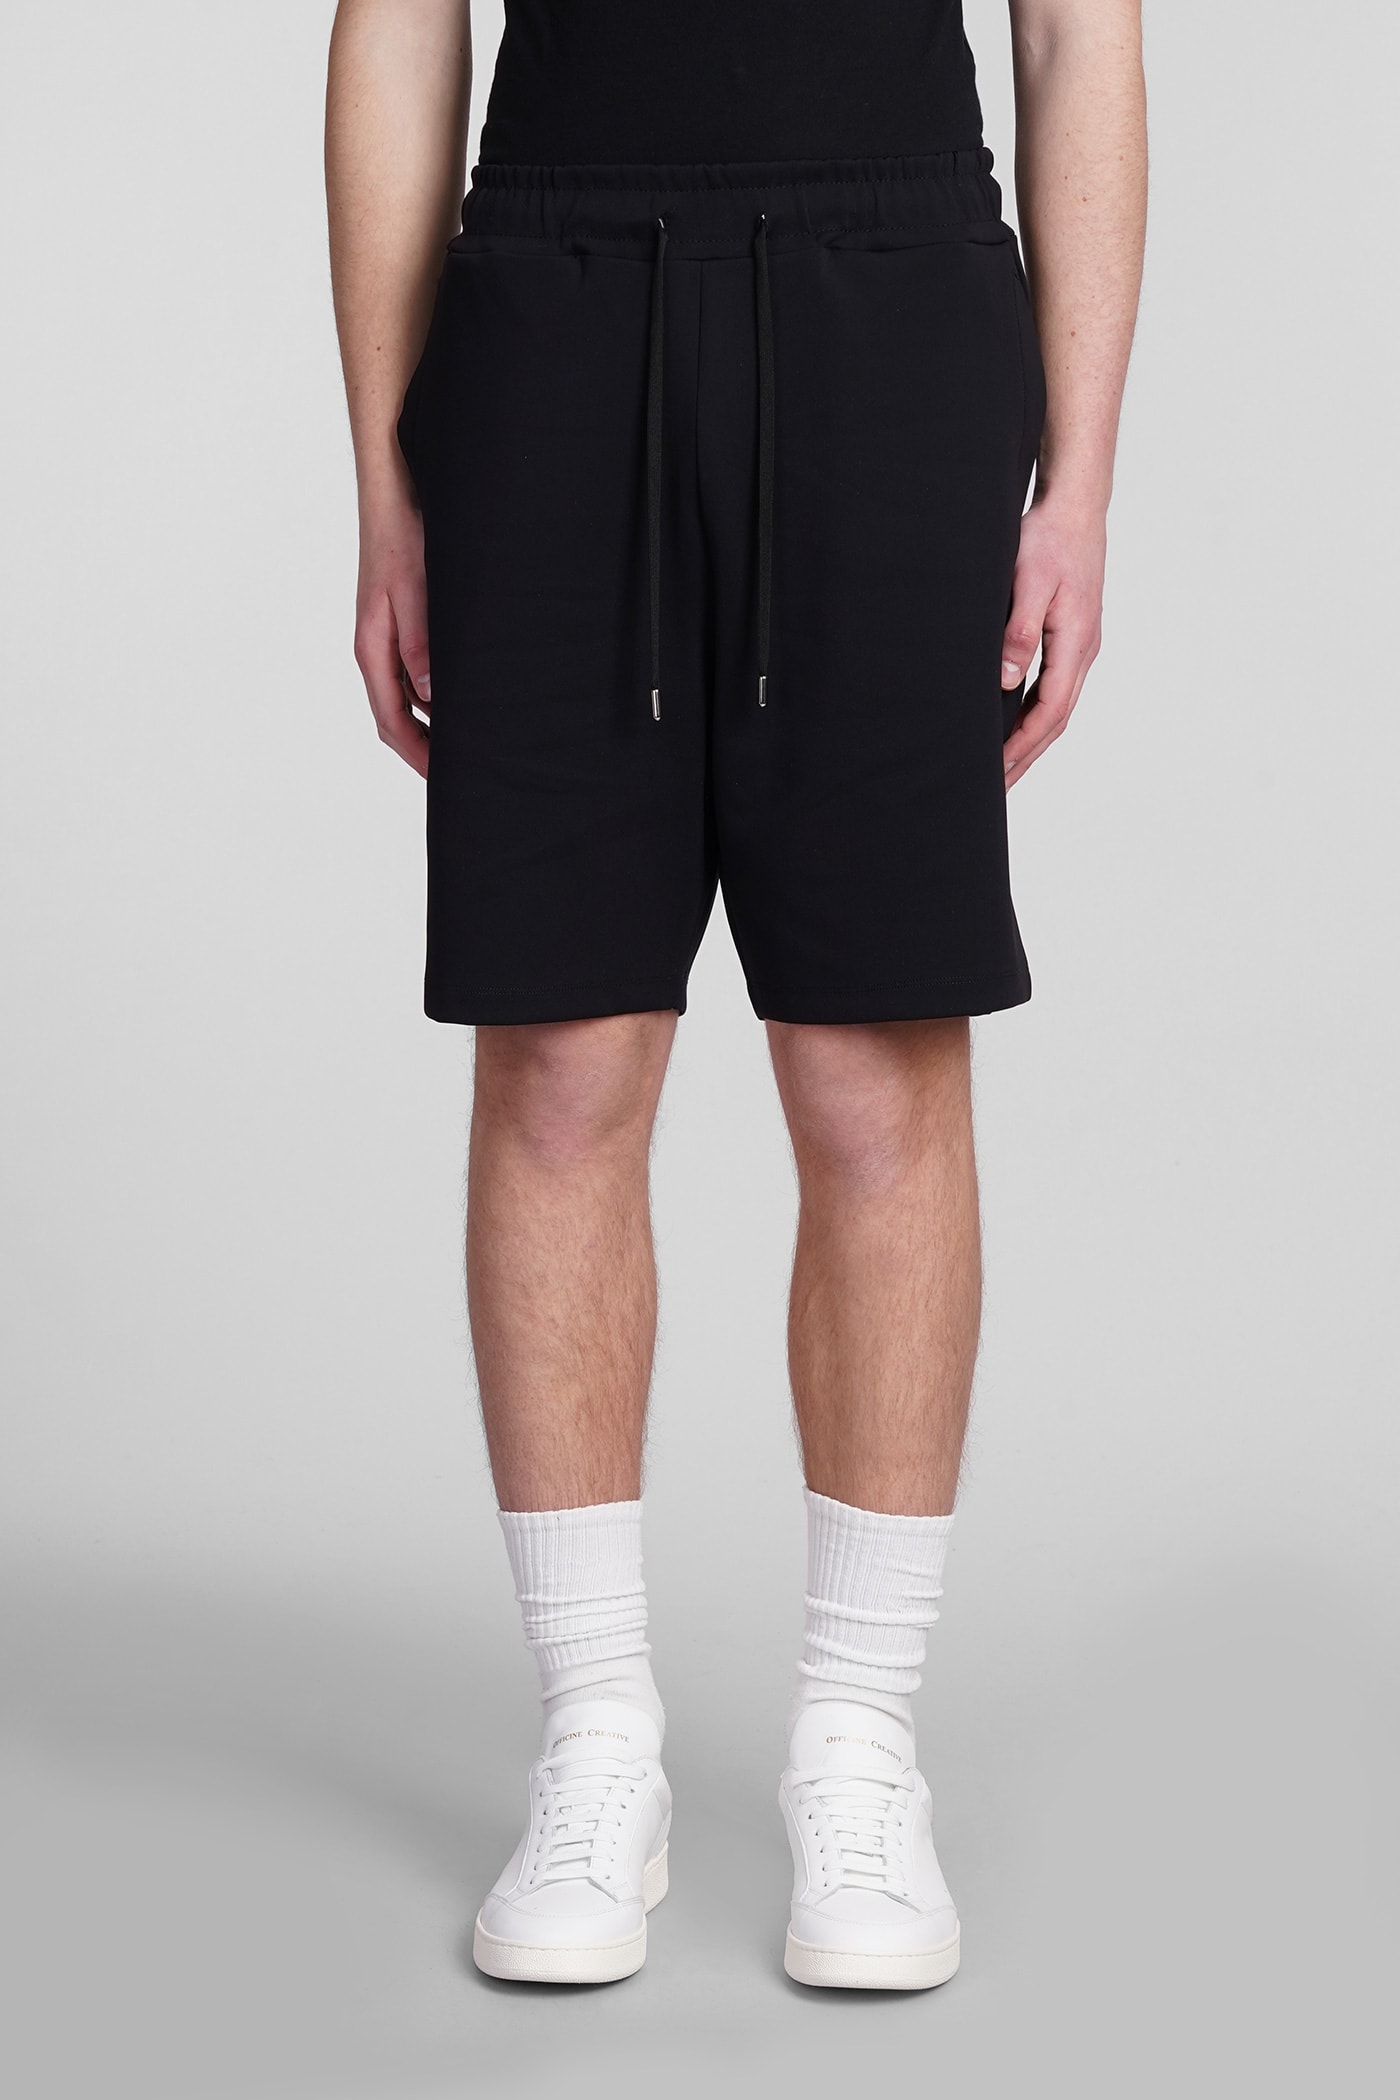 Costumein Joggers Shorts In Black Polyamide